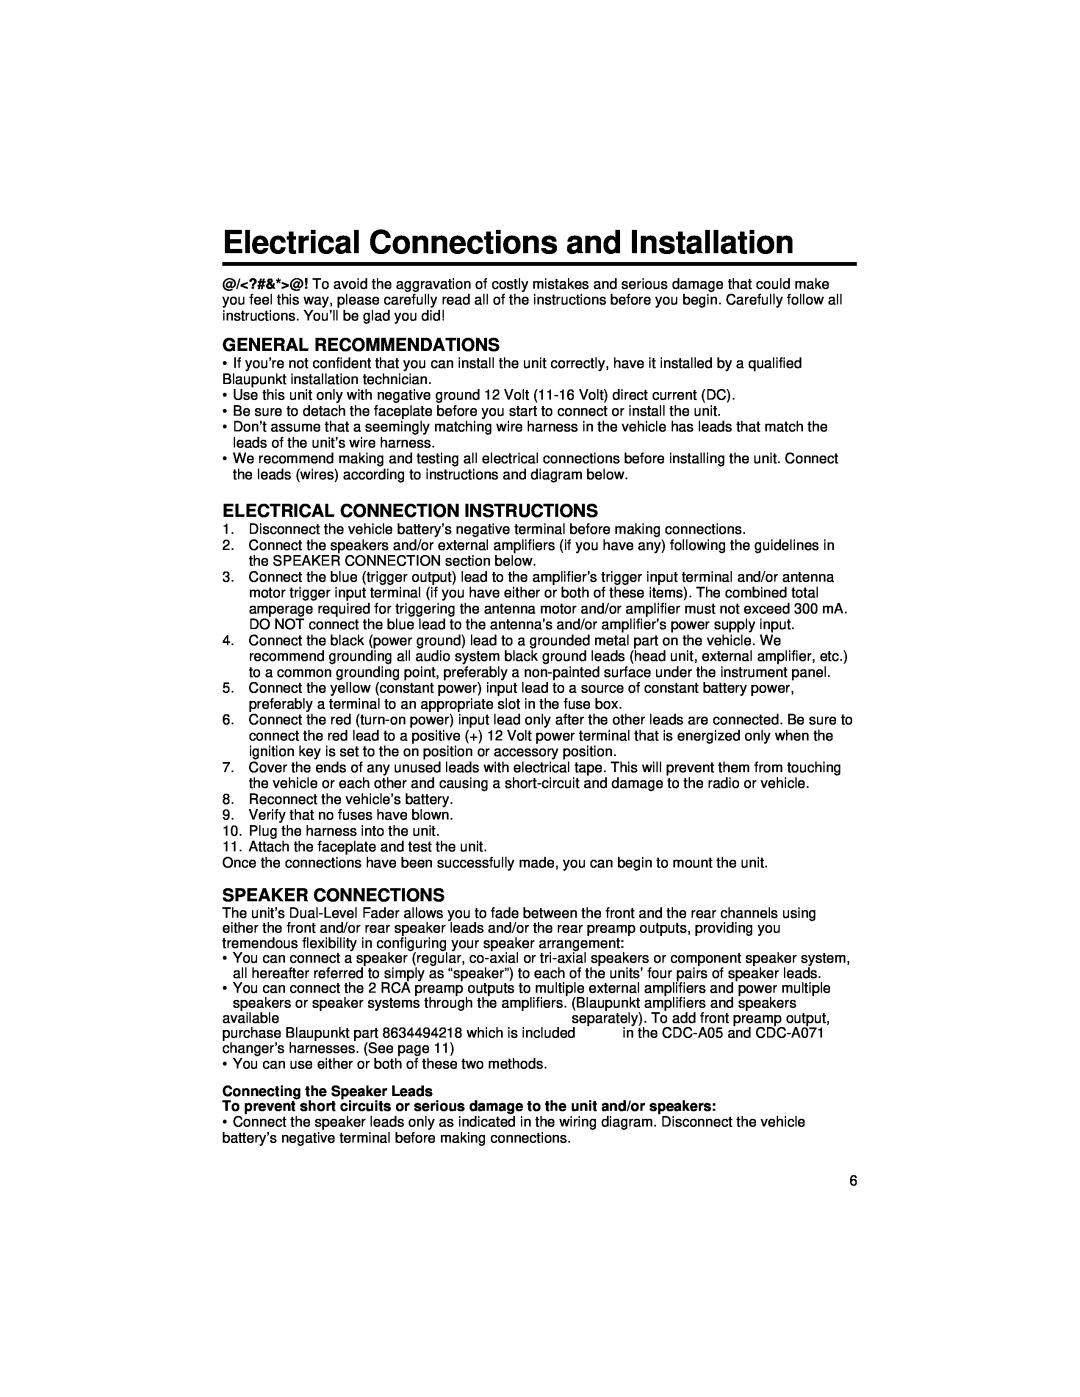 Blaupunkt CD127 manual Electrical Connections and Installation, General Recommendations, Electrical Connection Instructions 